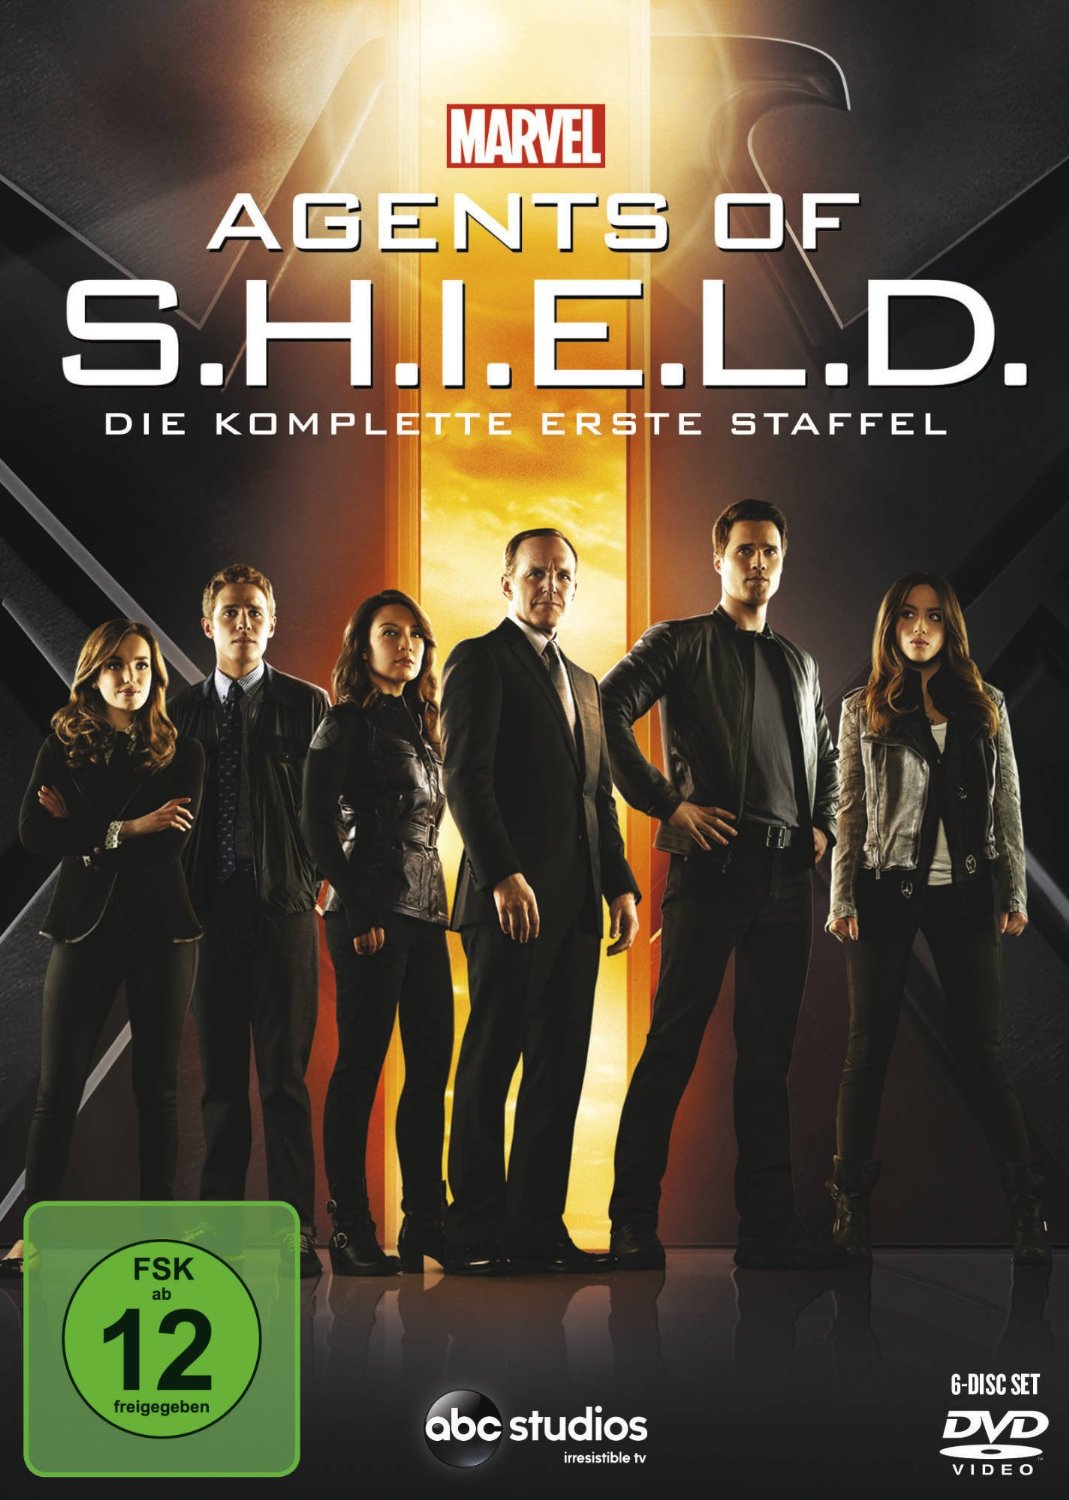 Marvels Agents of SHIELD S01 Complete Season 720p